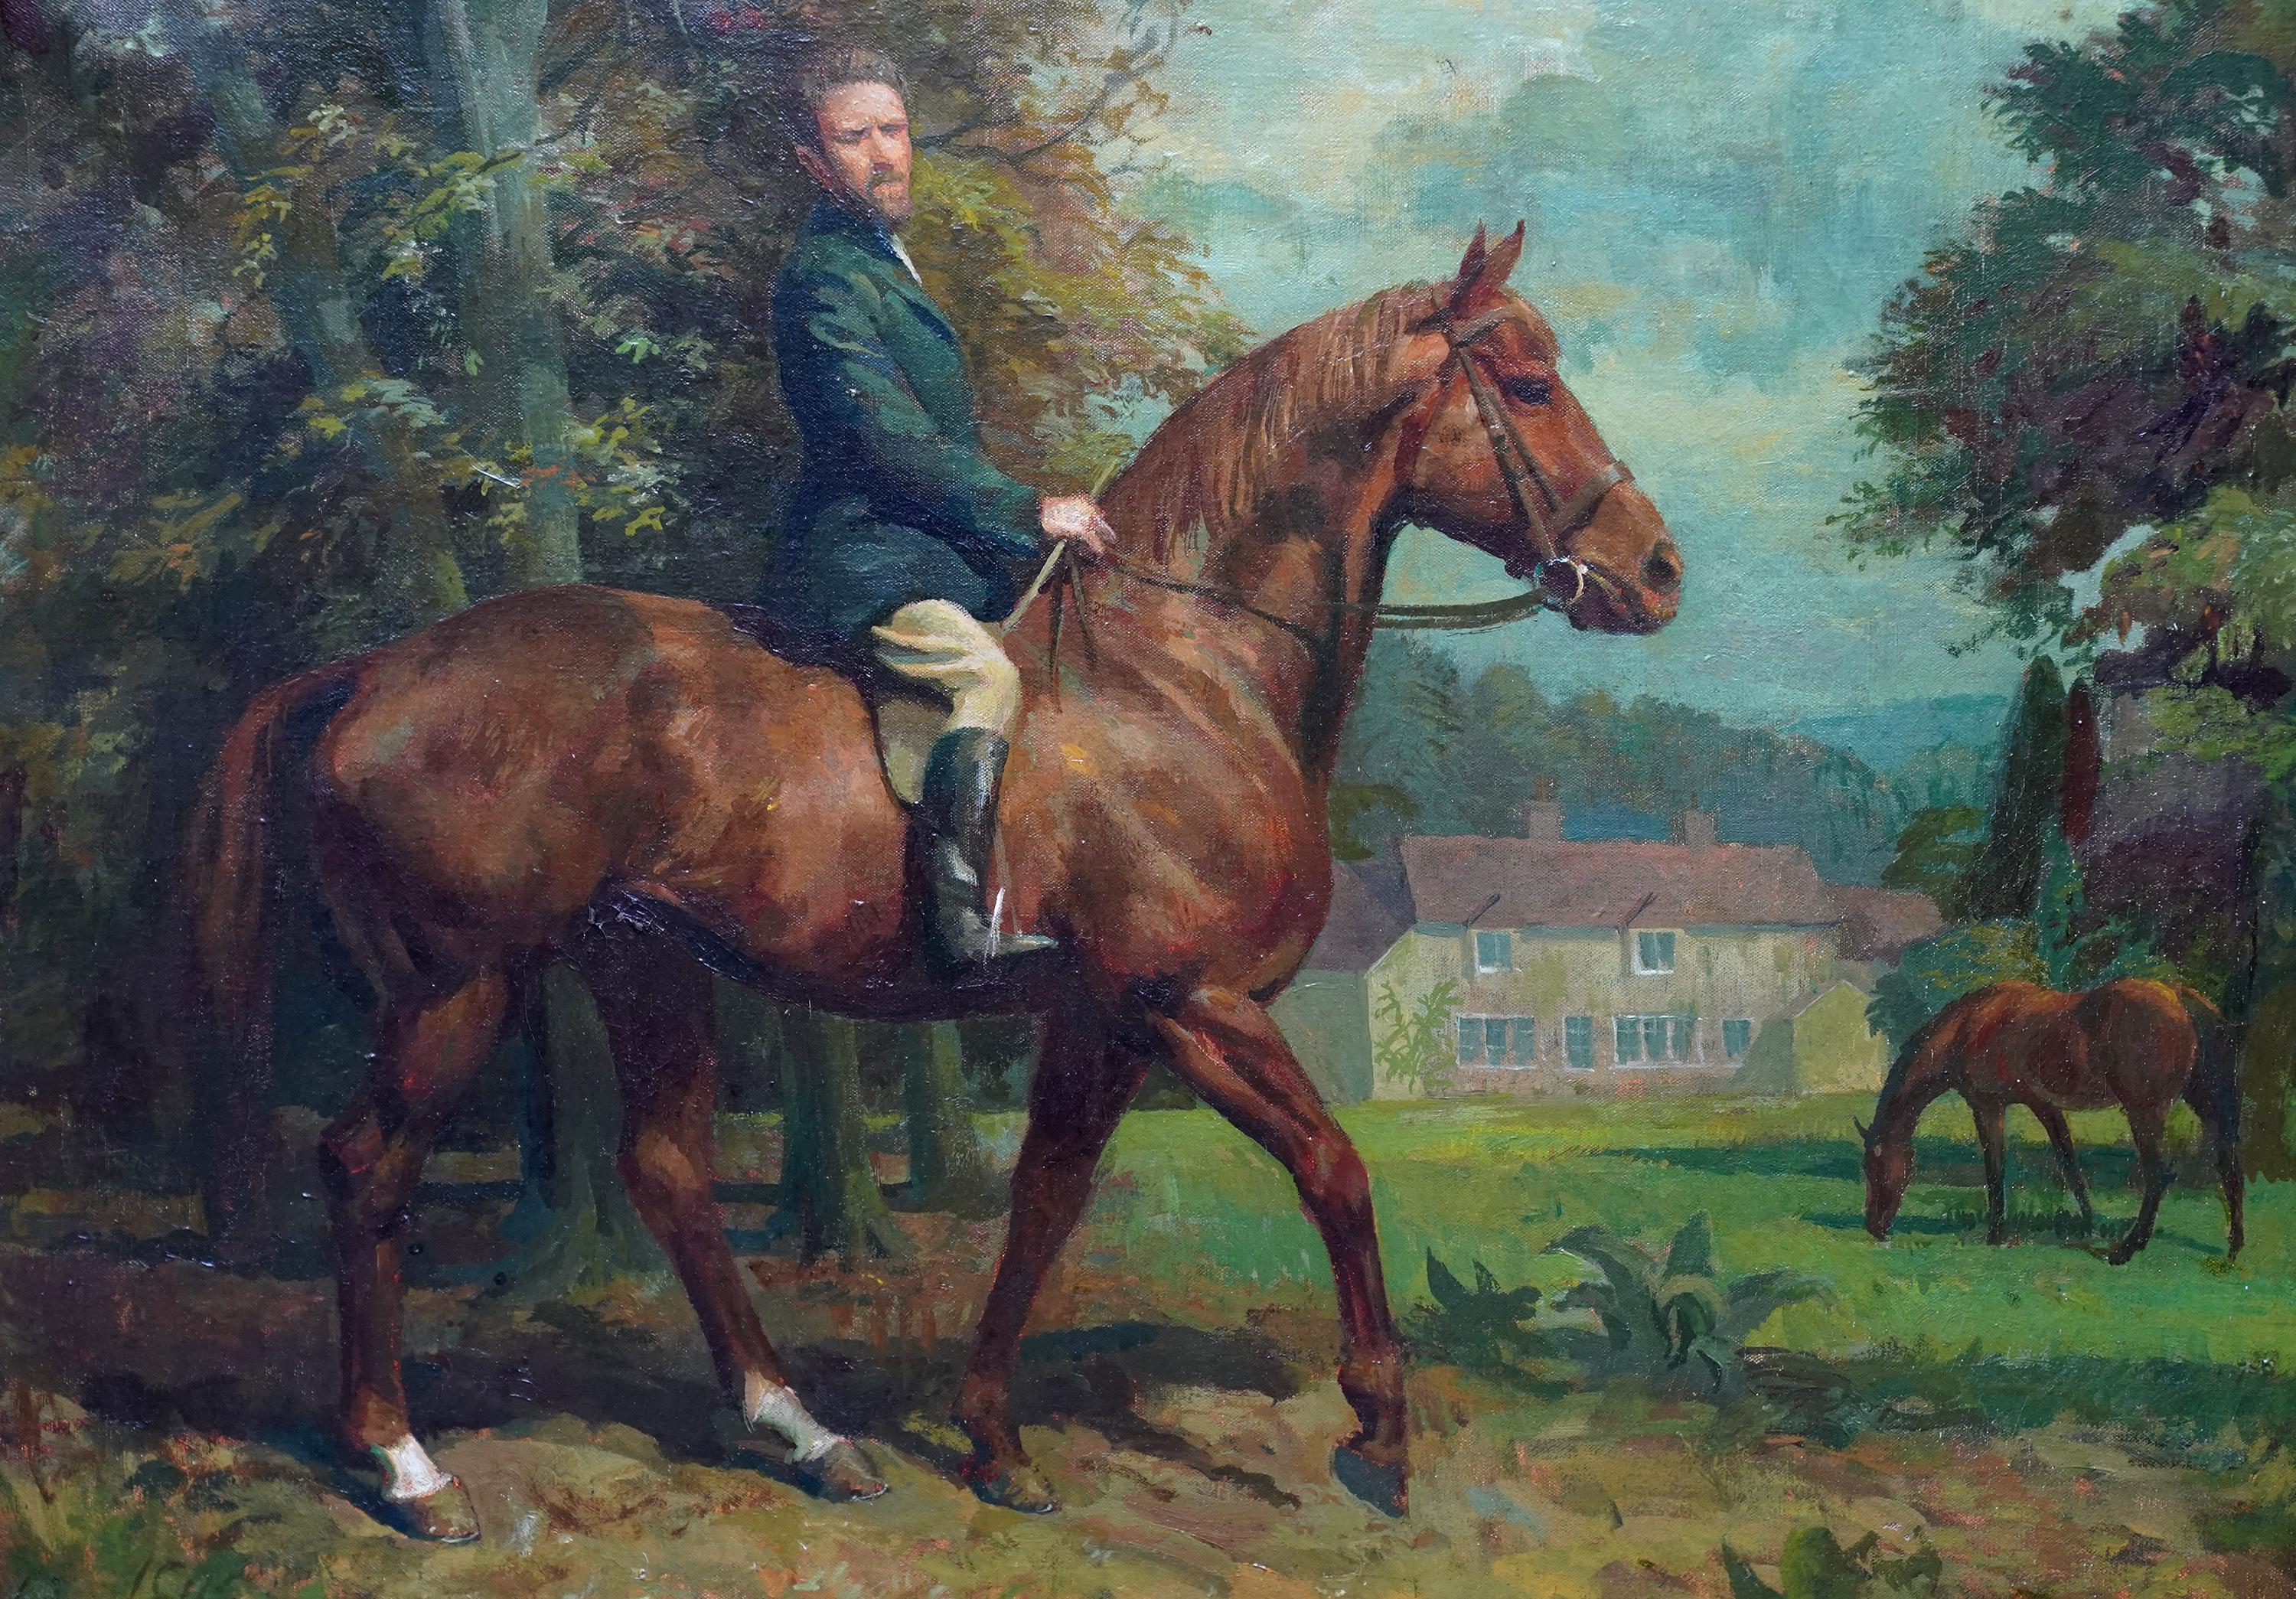 Self Portrait on Horse in Landscape - British 50's art equine rider oil painting - Realist Painting by Lionel Ellis